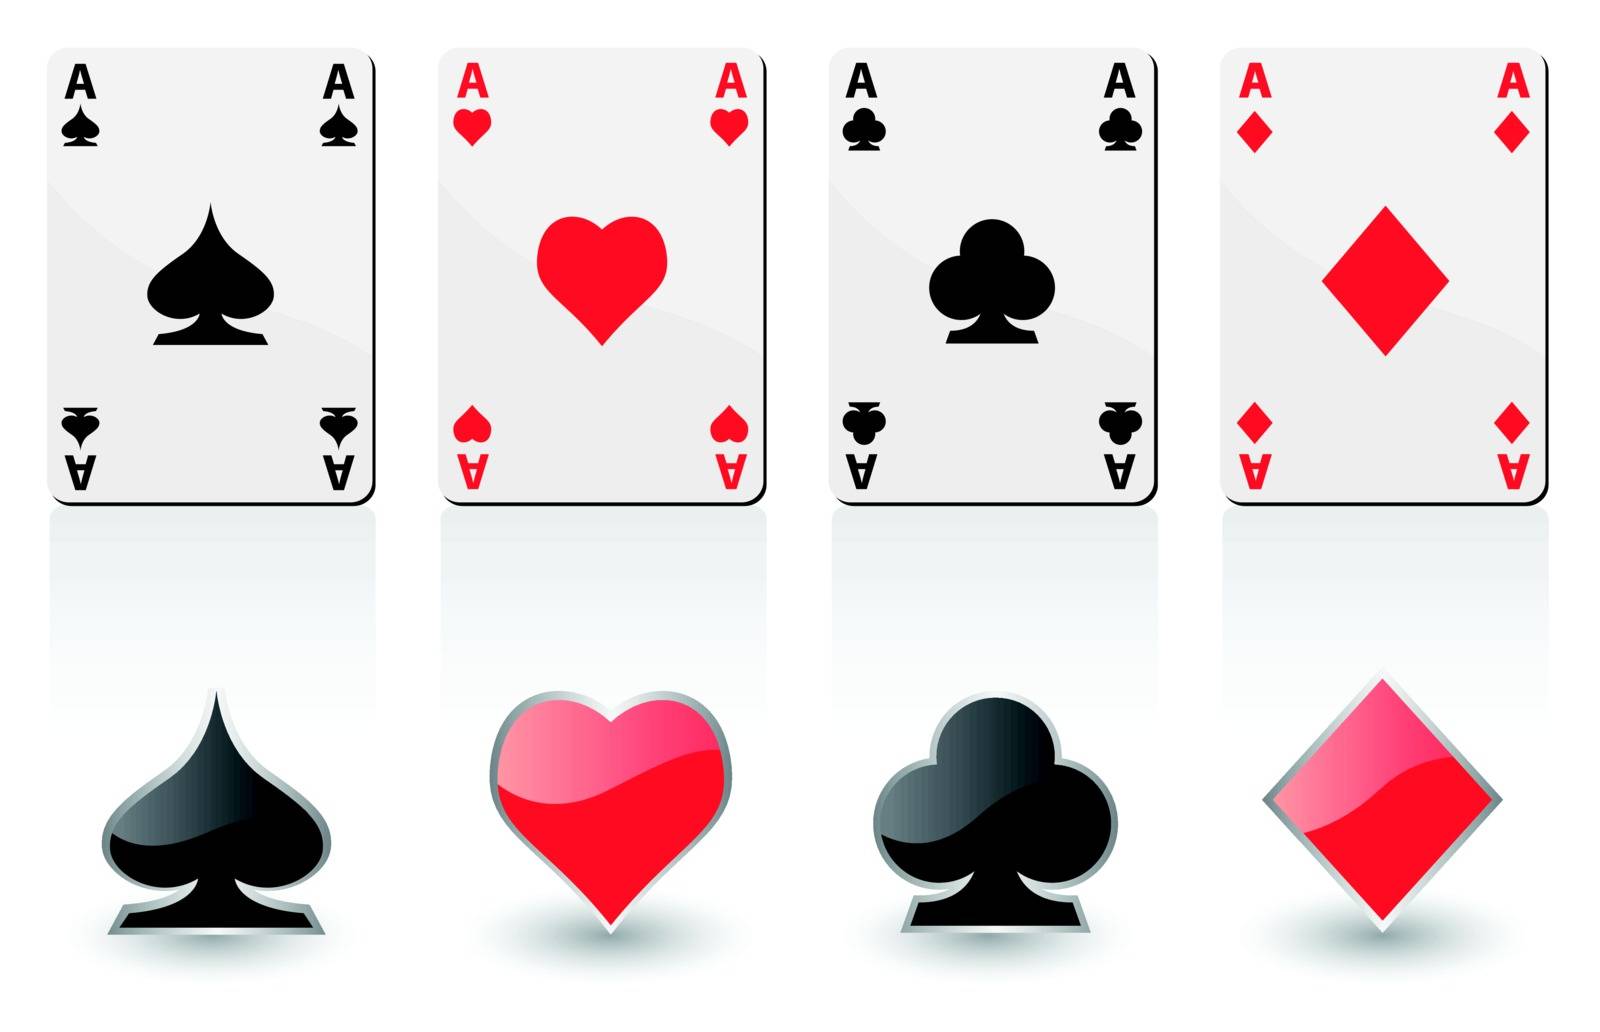 four aces by emirsimsek